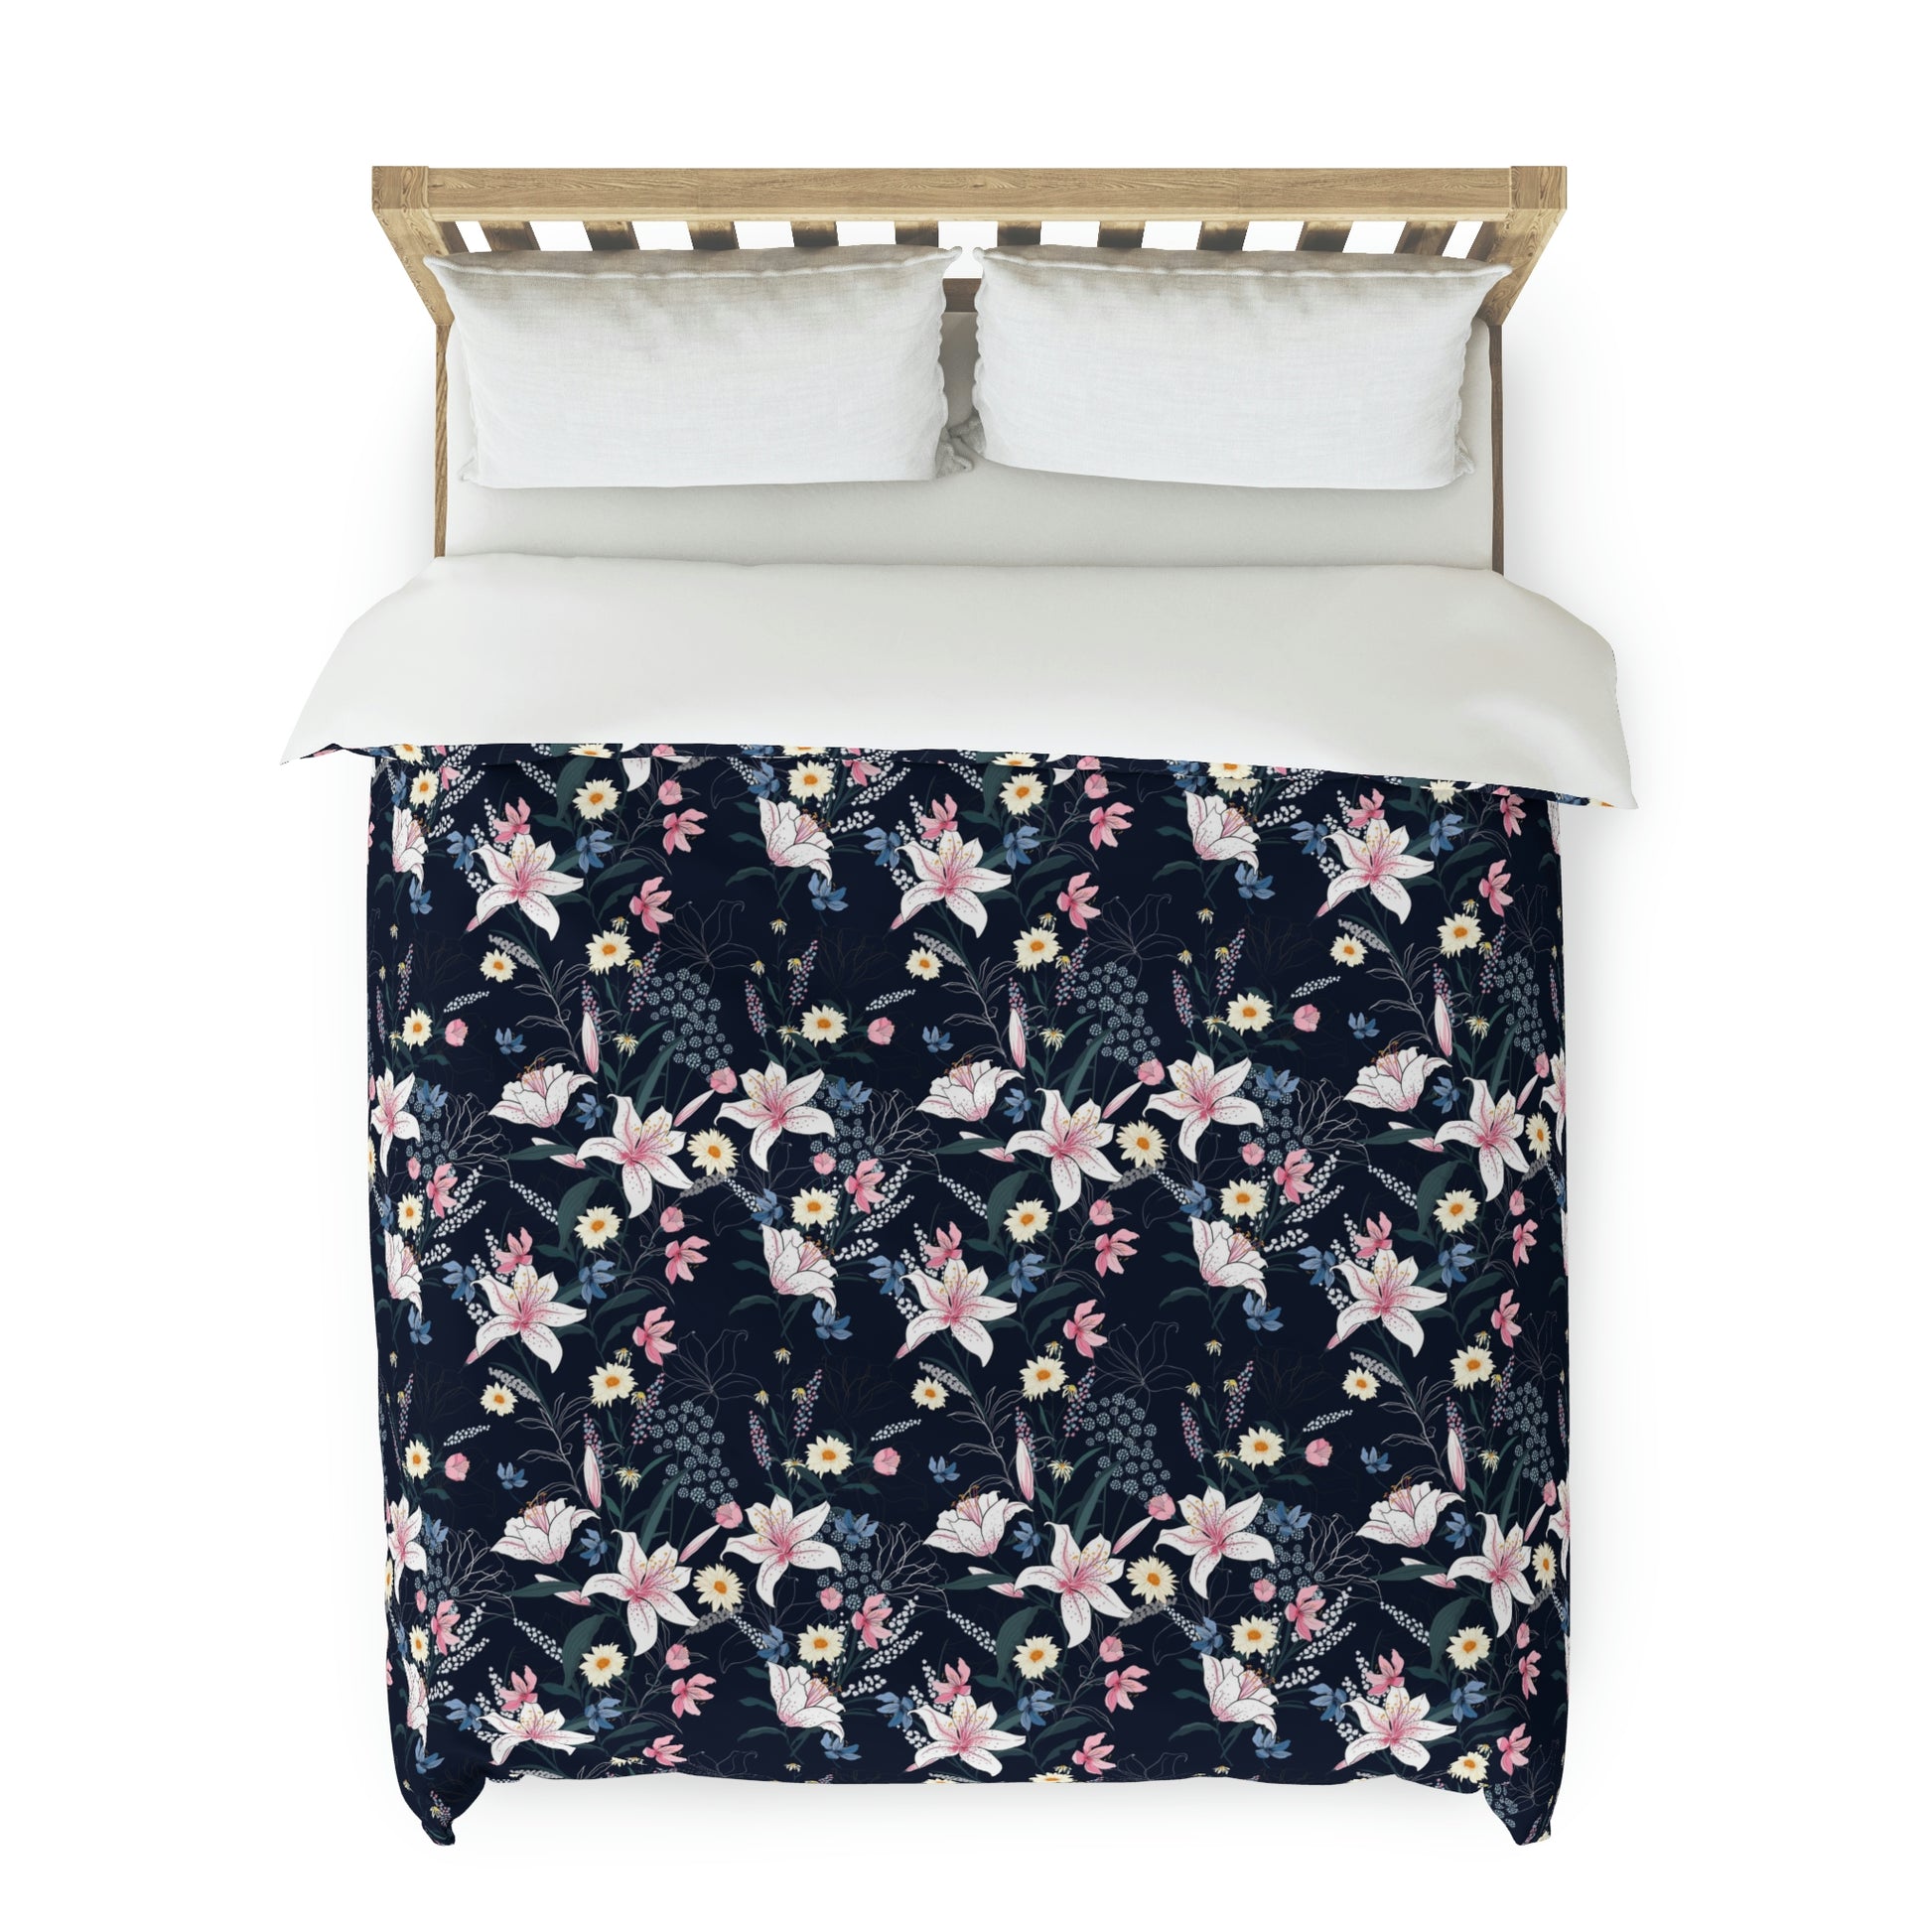 navy Blue & Pink Floral Pattern Duvet Cover lying on a bed, microfiber duvet cover bedroom accent